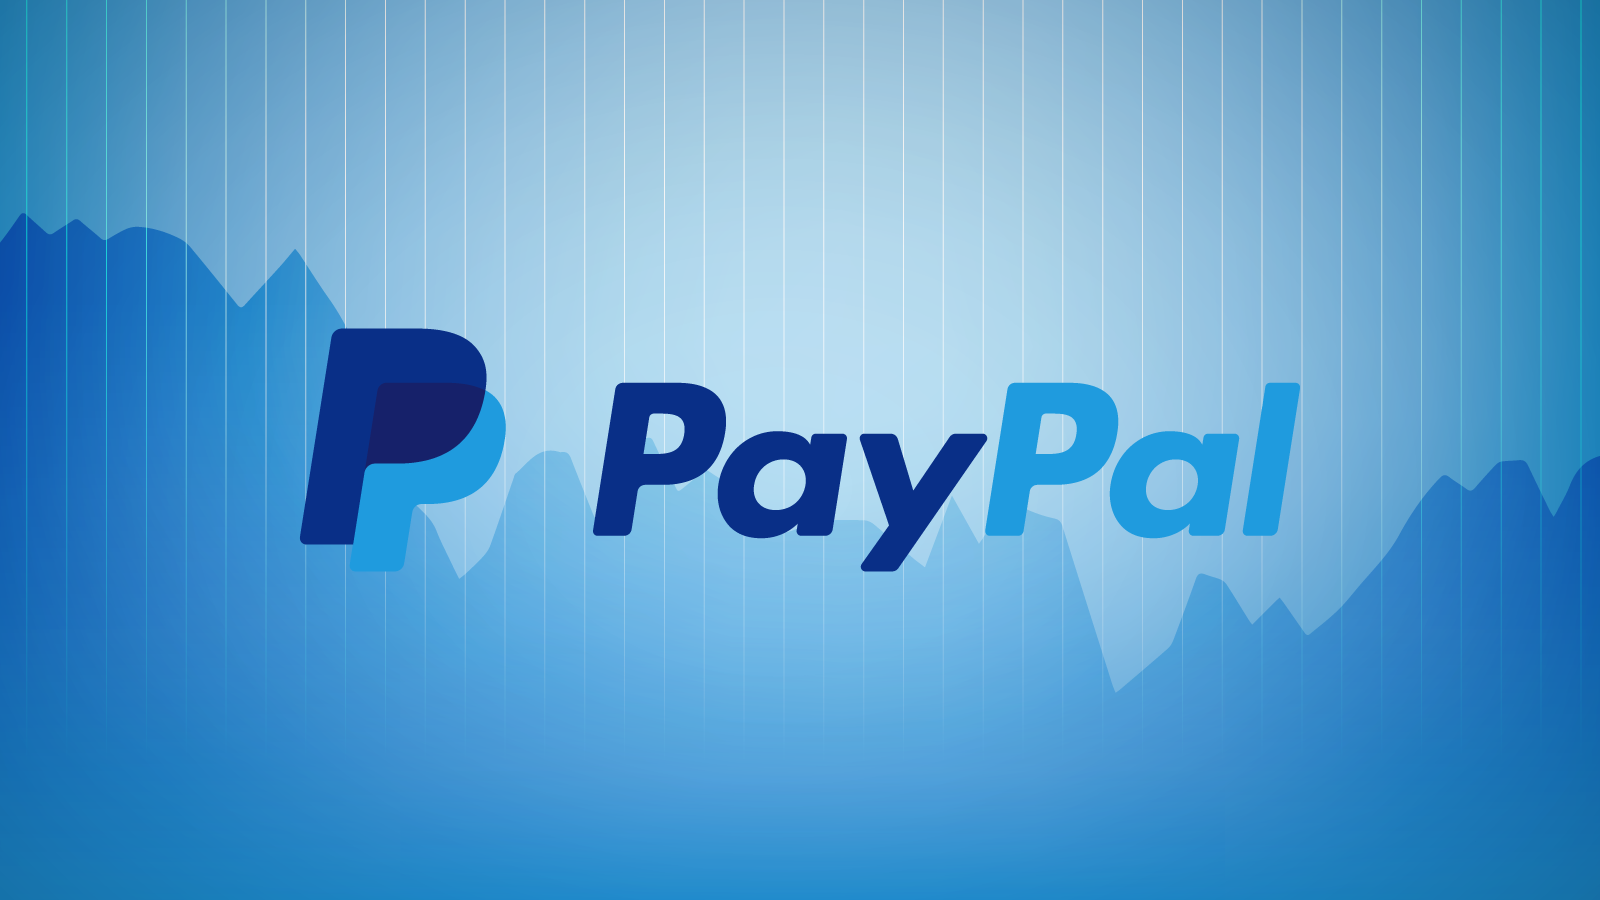 Ghana will return to Paypal compliant list in 2020